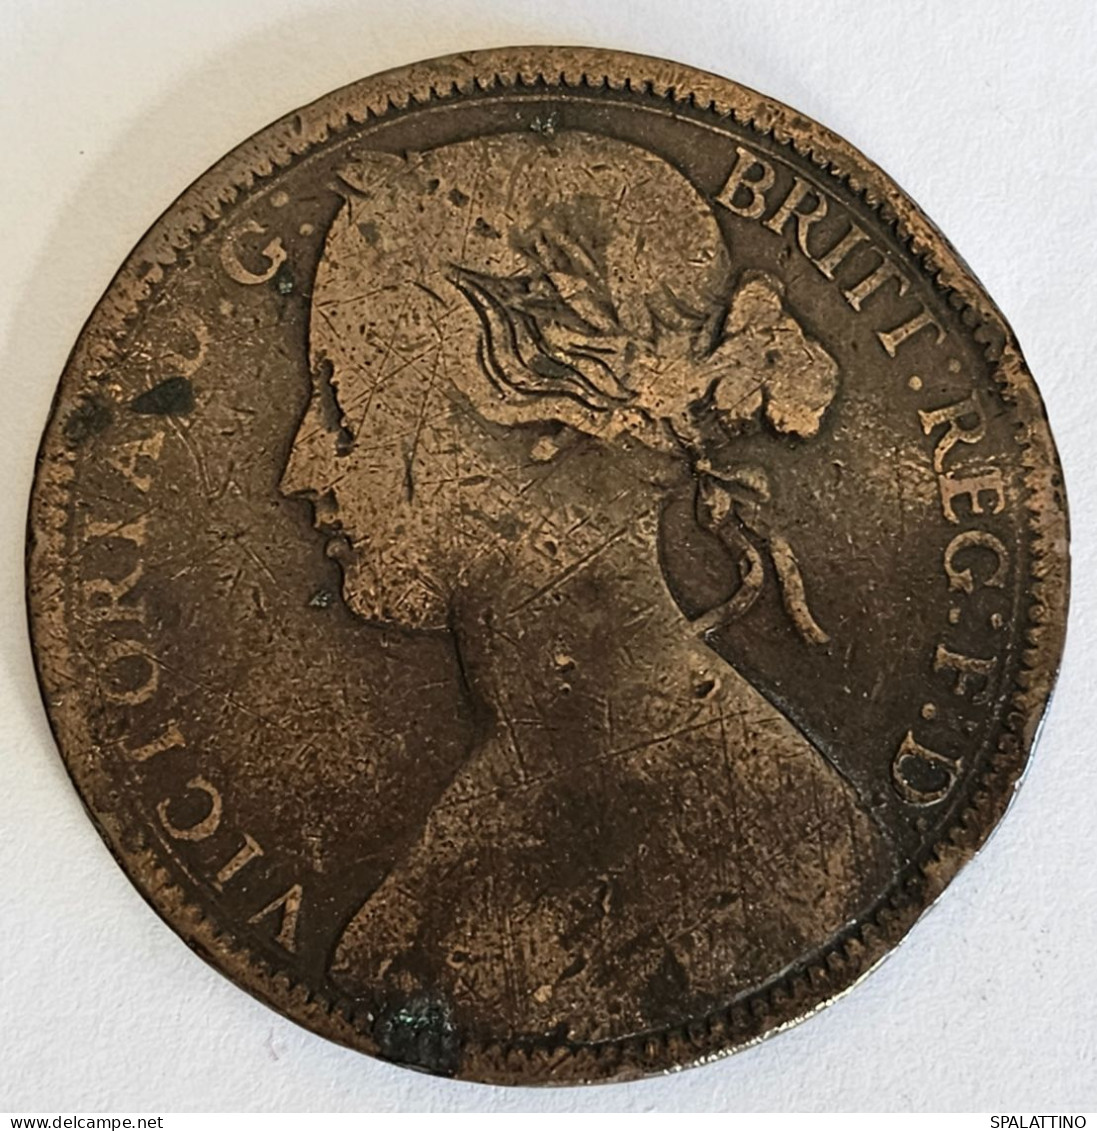 GREAT  BRITAIN- ONE PENNY 1863. - D. 1 Penny